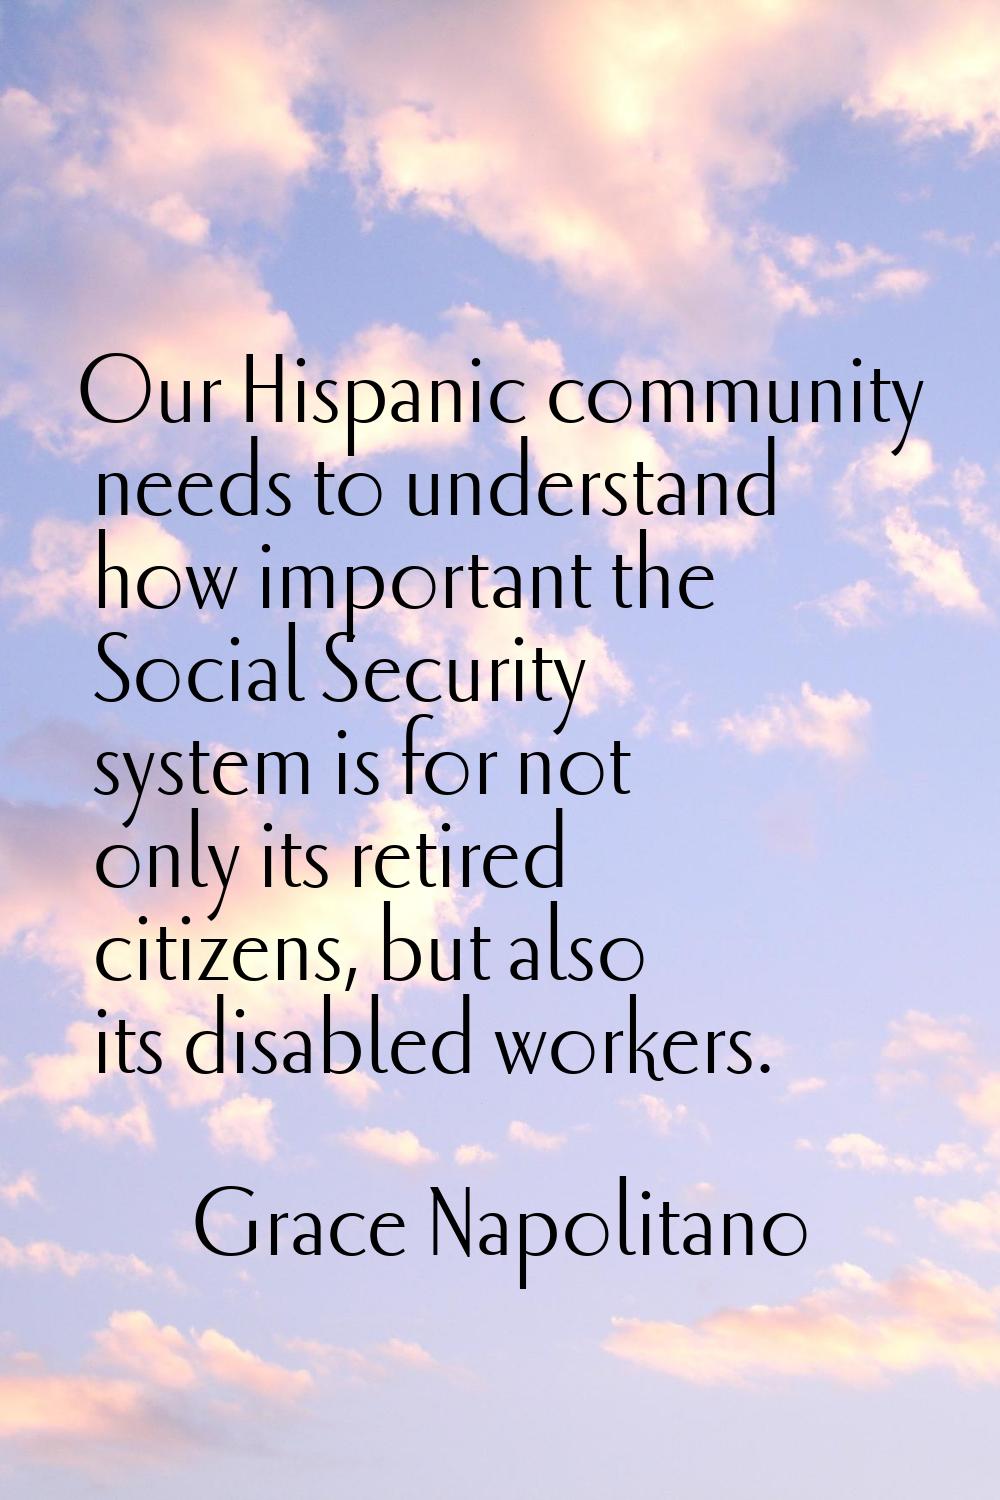 Our Hispanic community needs to understand how important the Social Security system is for not only